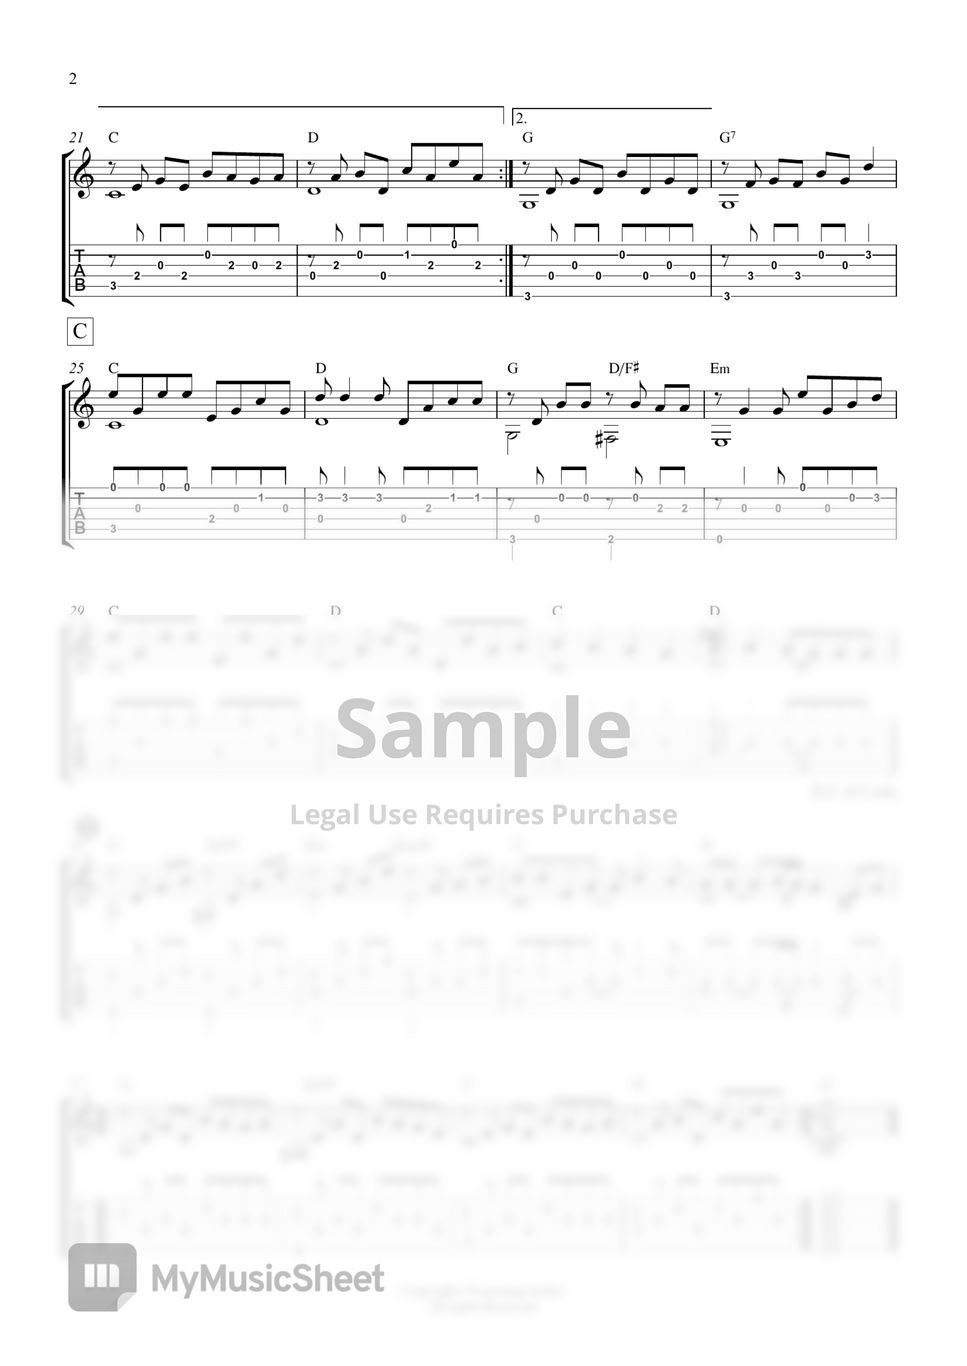 Eric Clapton - Wonderful Tonight Fingerstyle Guitar (TAB) by Learning Guitar